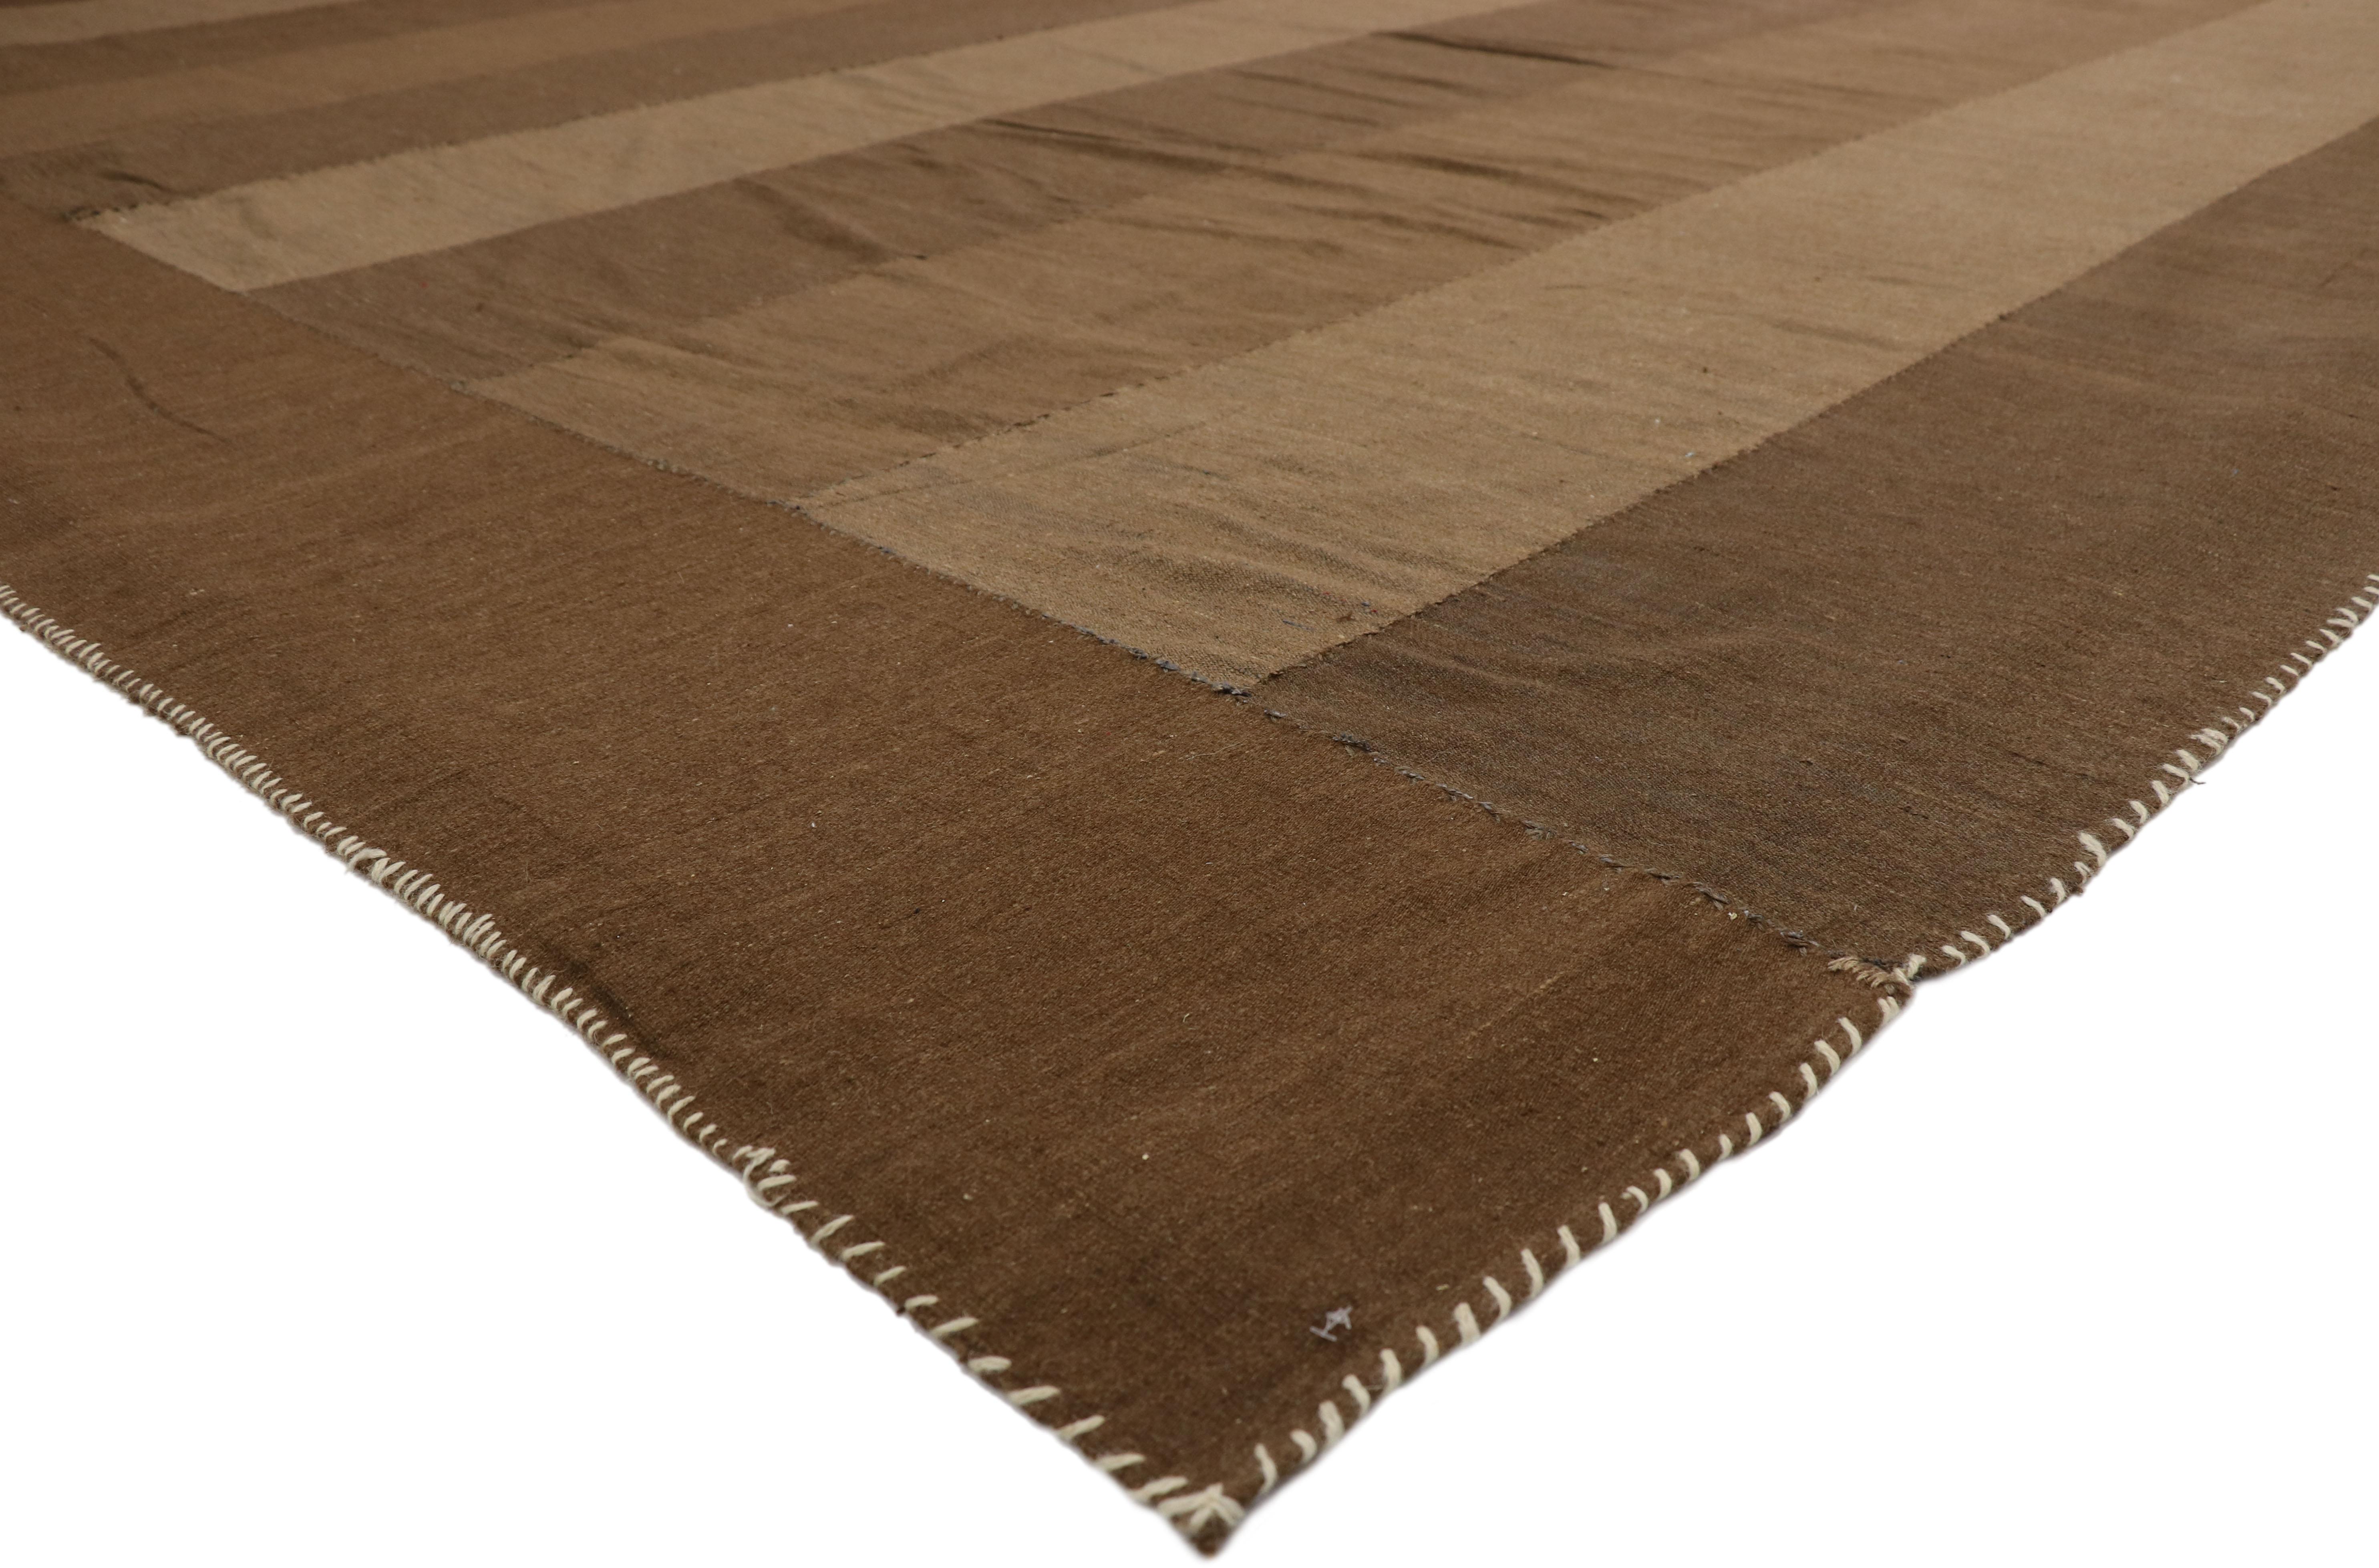 76390, vintage Persian Kilim Area rug with Mid-Century Modern style, flat-weave rug. Minimalist elegance and earth-toned energy are captured in this handwoven wool vintage Persian Kilim area rug. Bespeaking luxury and refinement with understated